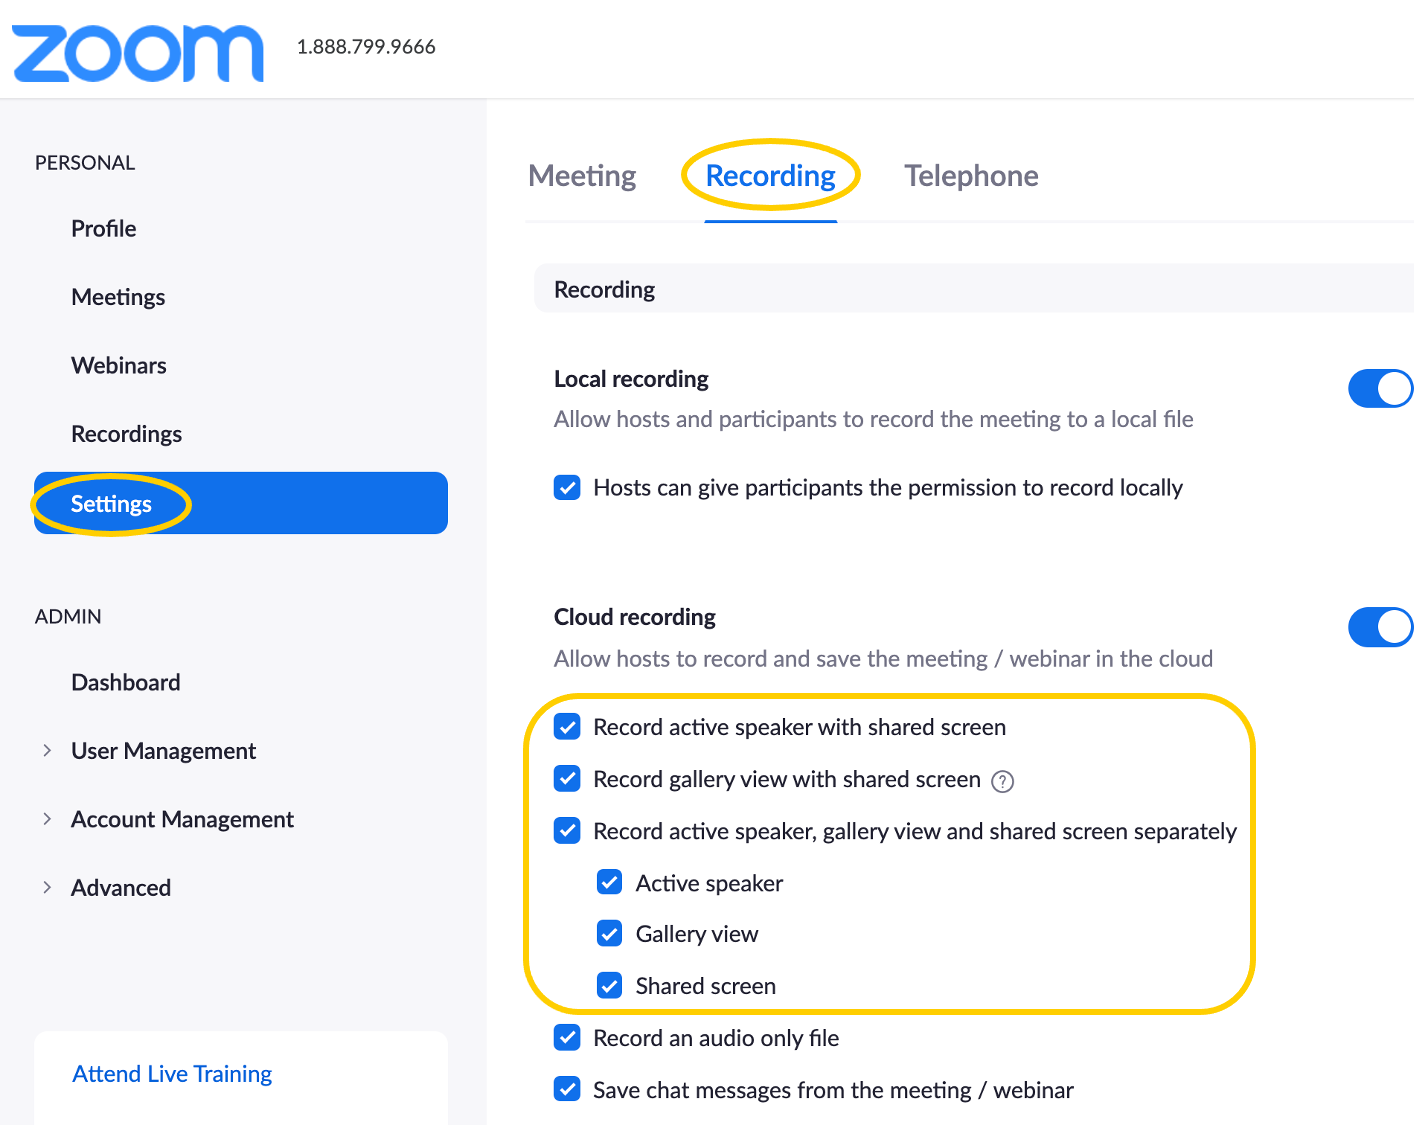 how to download a zoom cloud recording to pc